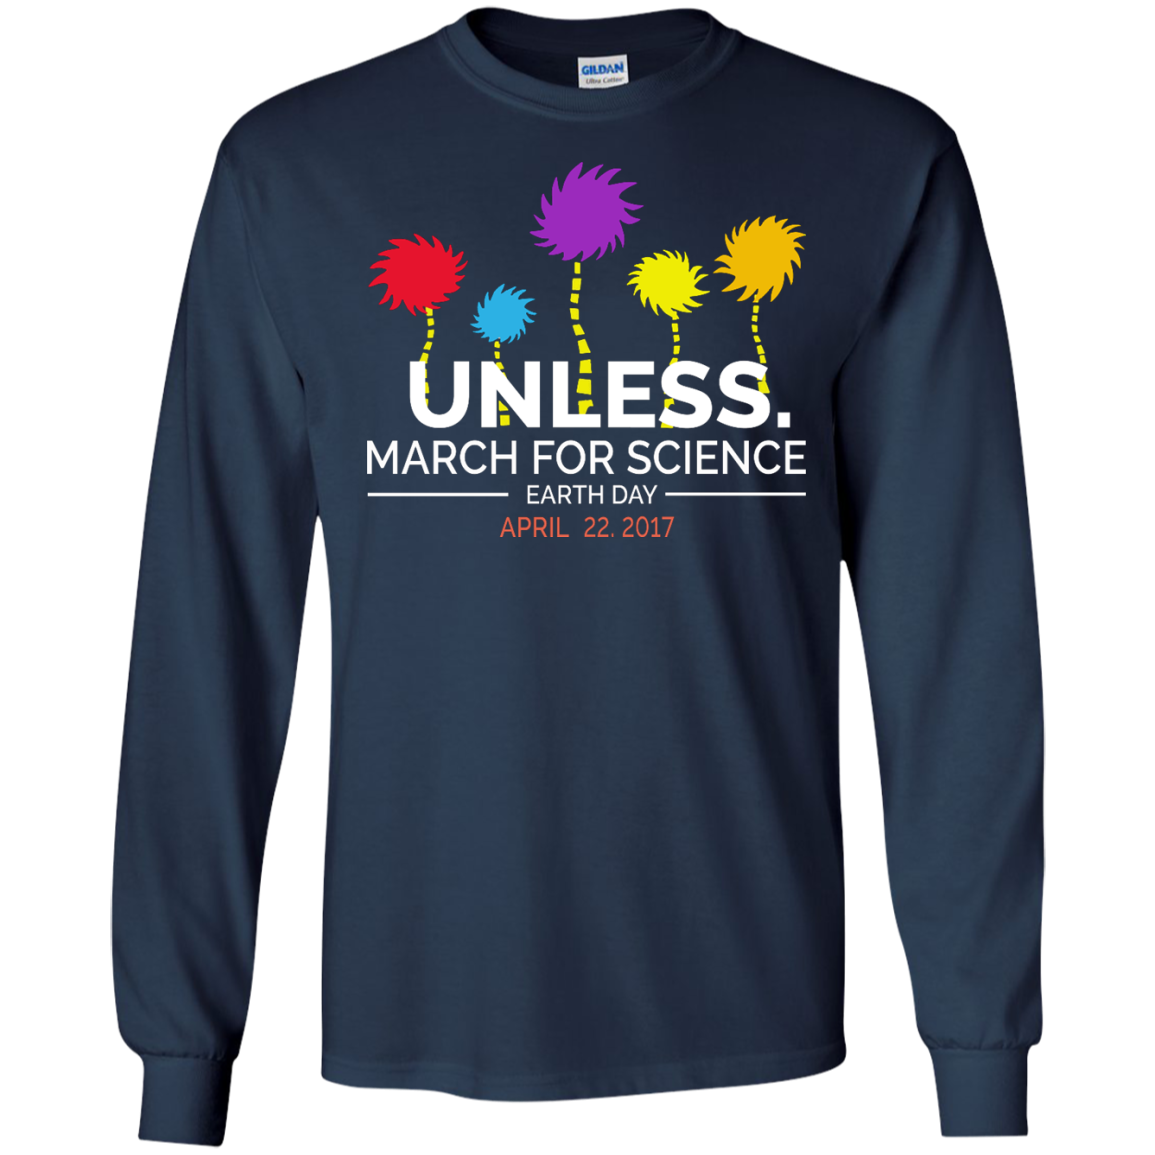 Unless March for Science long sleeve shirt in Navy color